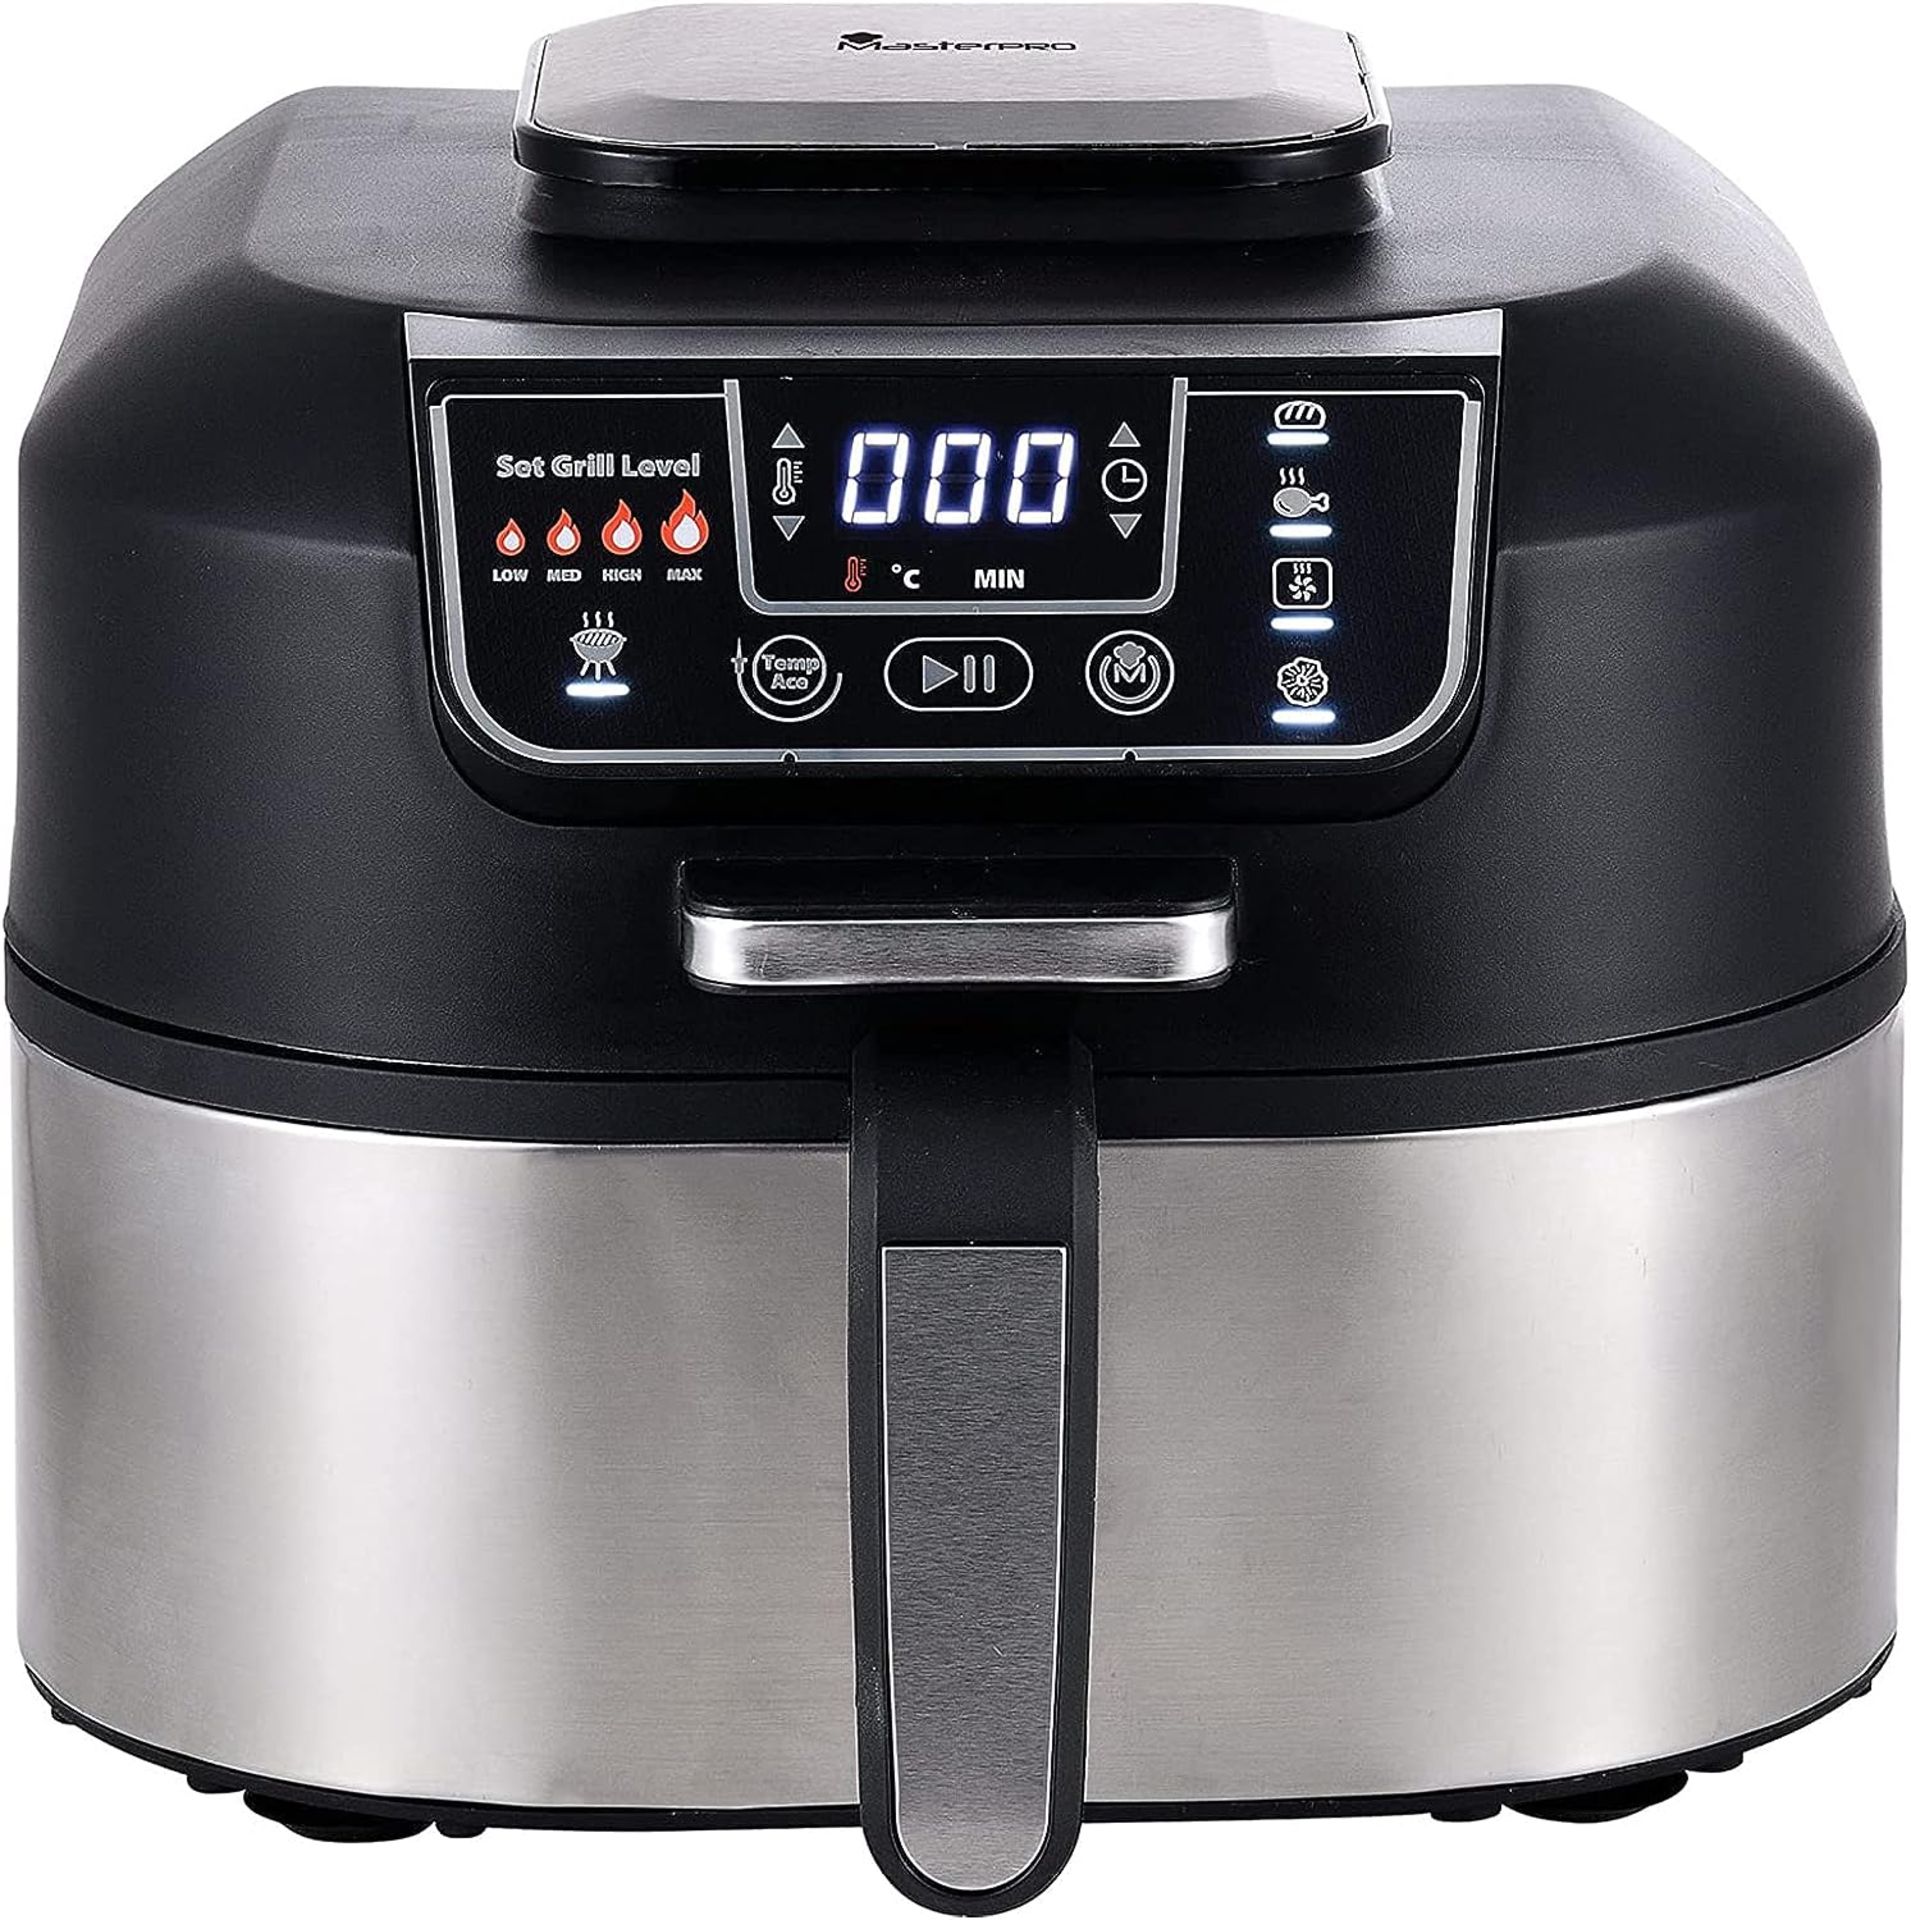 Trade Lot 8 X Brand New MasterPro Smokeless Grill, 5.6 Litre, 1760 W, One Touch Food Processor